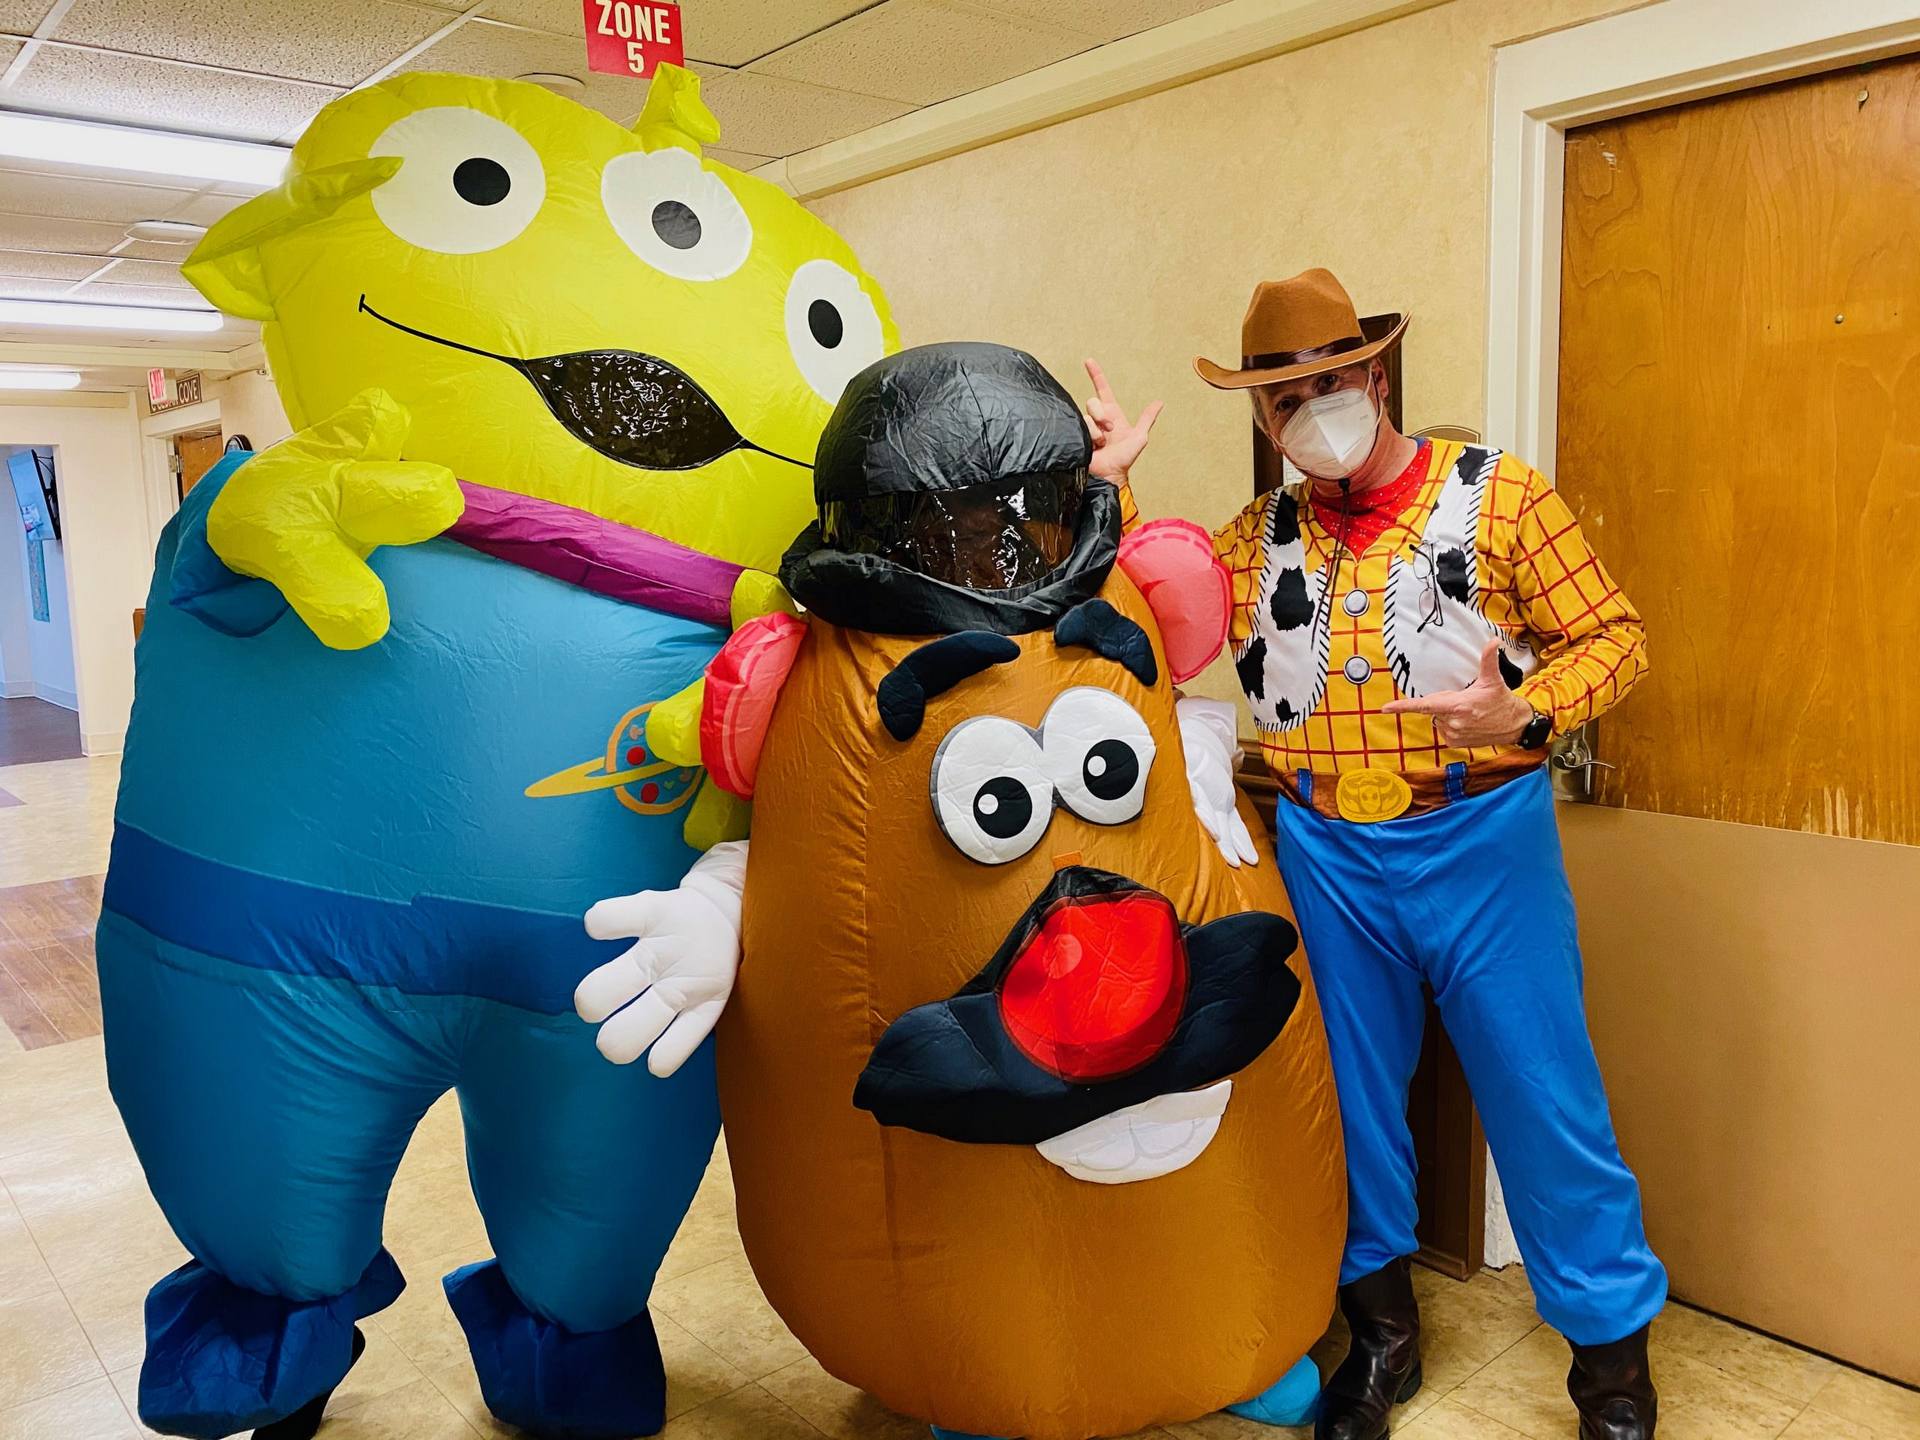 Members of the life enrichment team dressed up like characters from Toy Story.